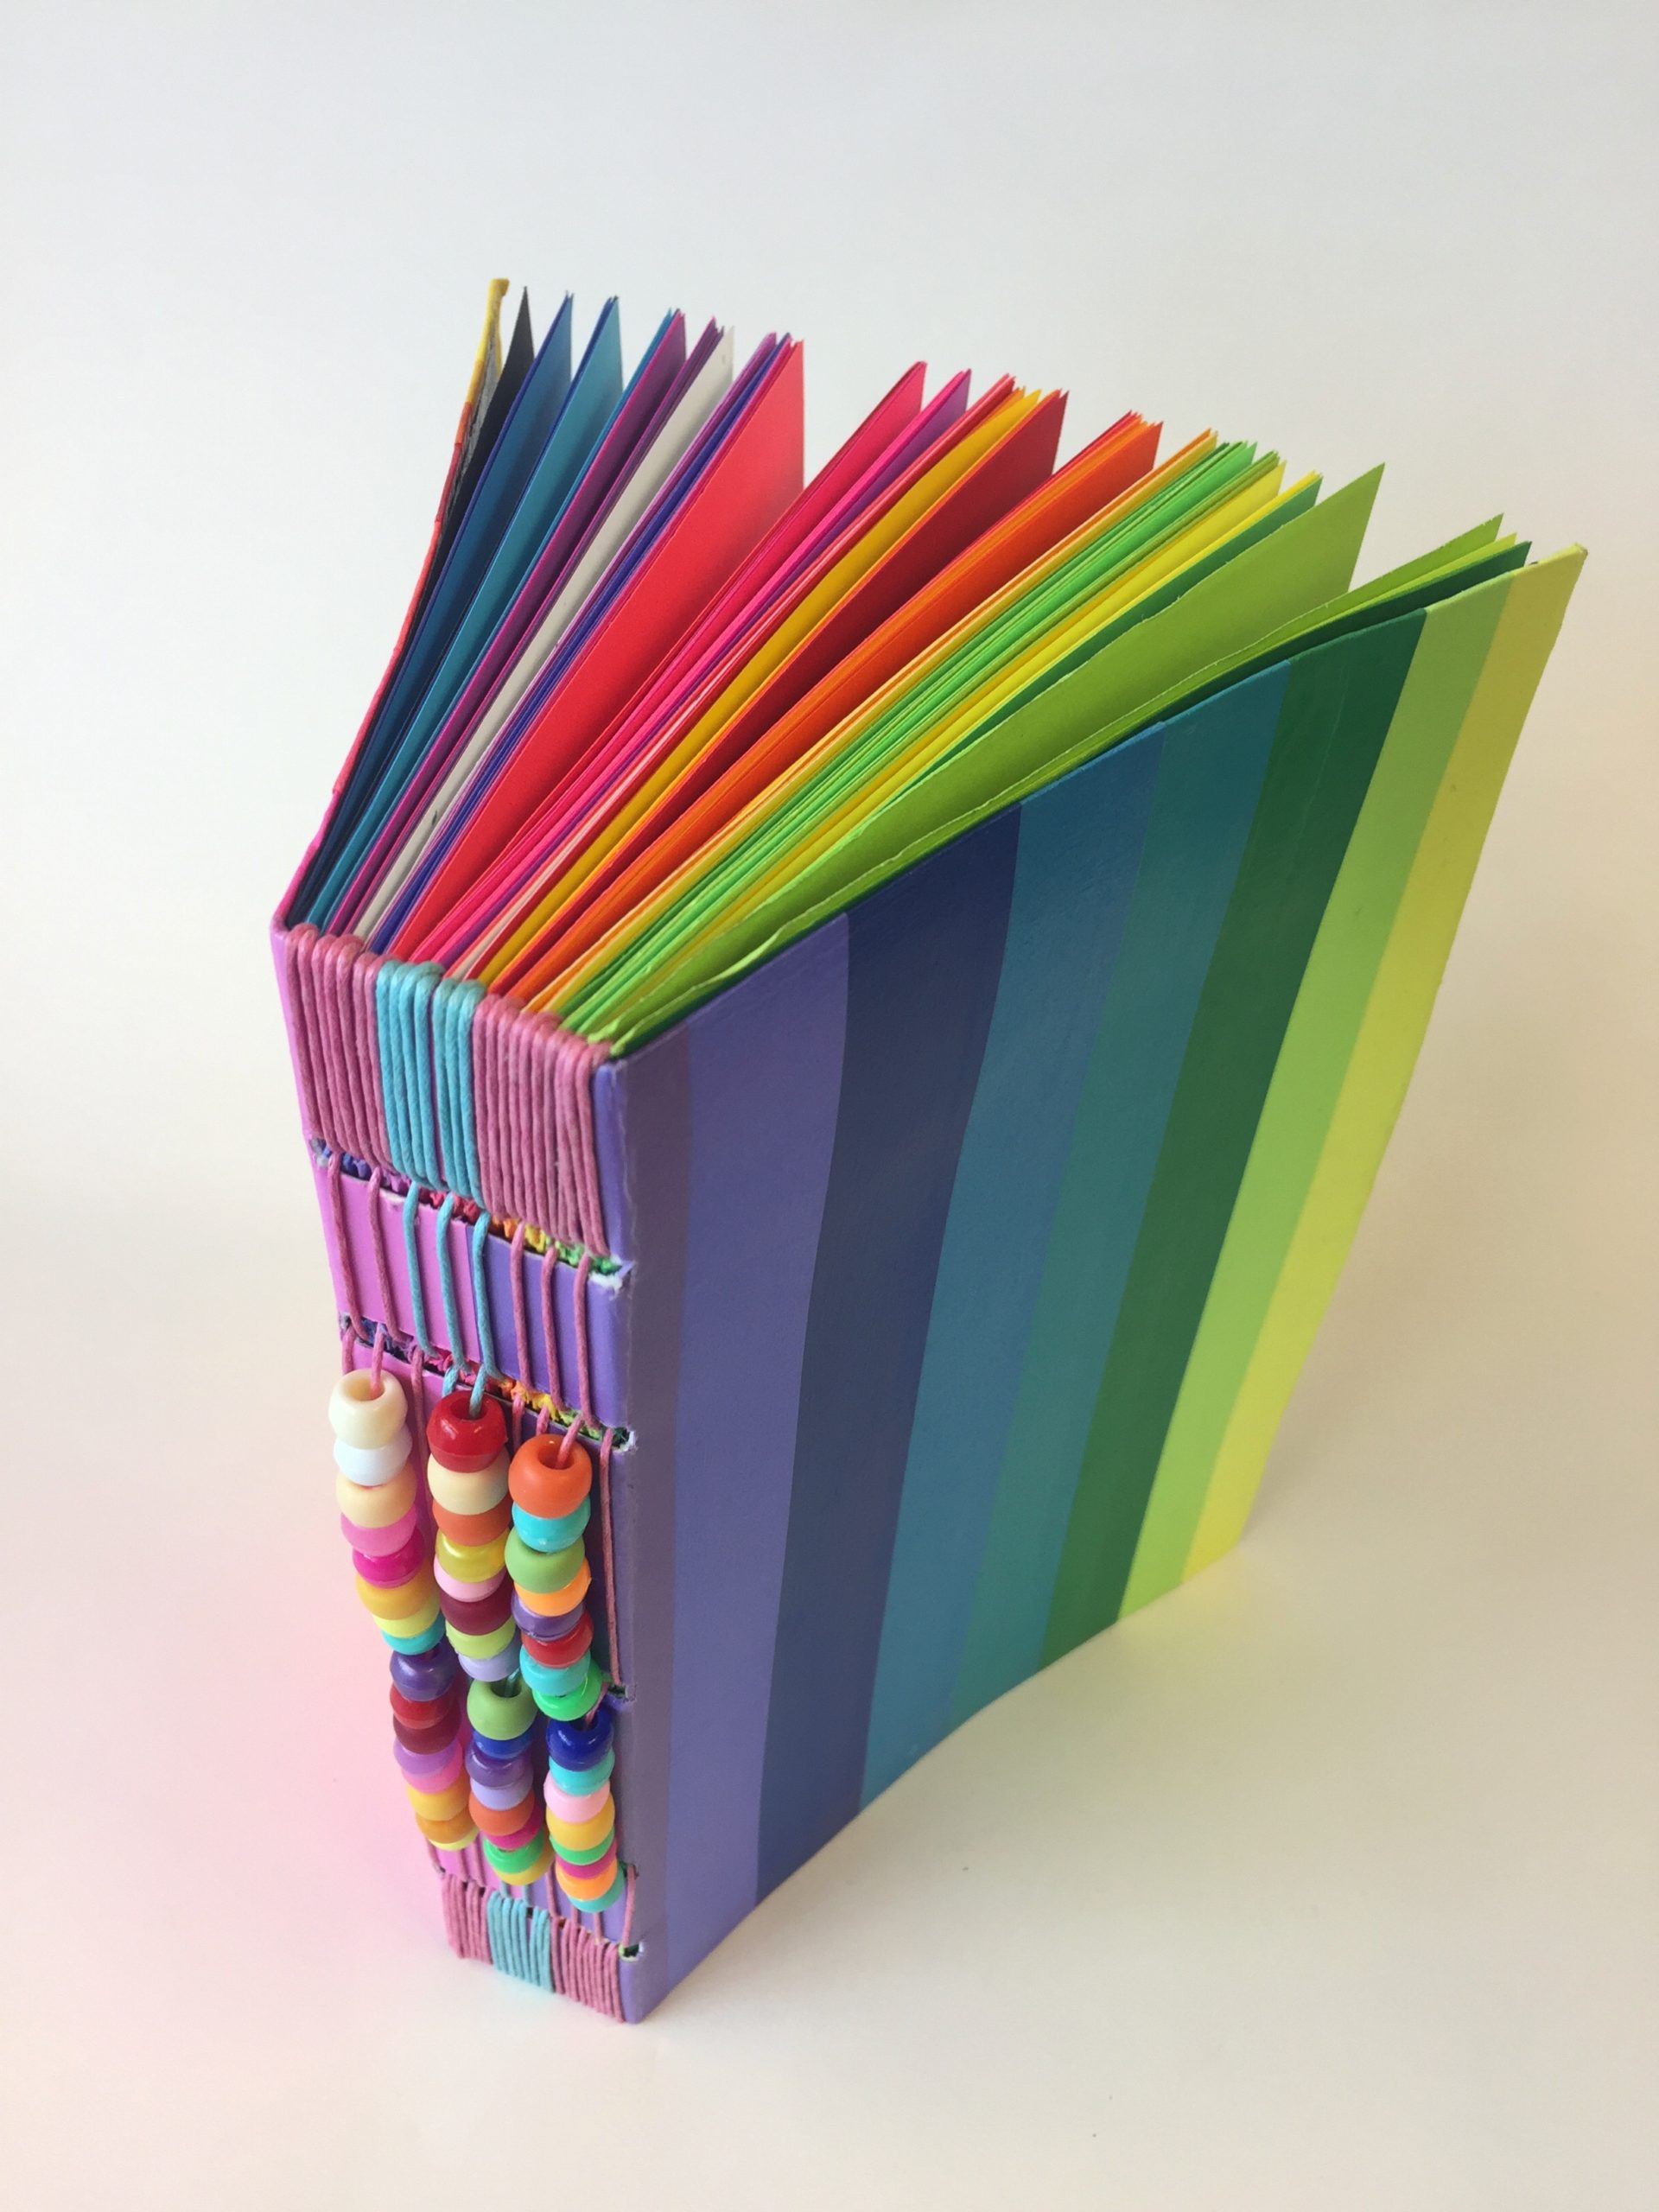 Baylee Finley, Long Stitch Book with Plastic Beads, Approx. 7″x5″x2.5″, AR330 Fibers I, Fall 2018